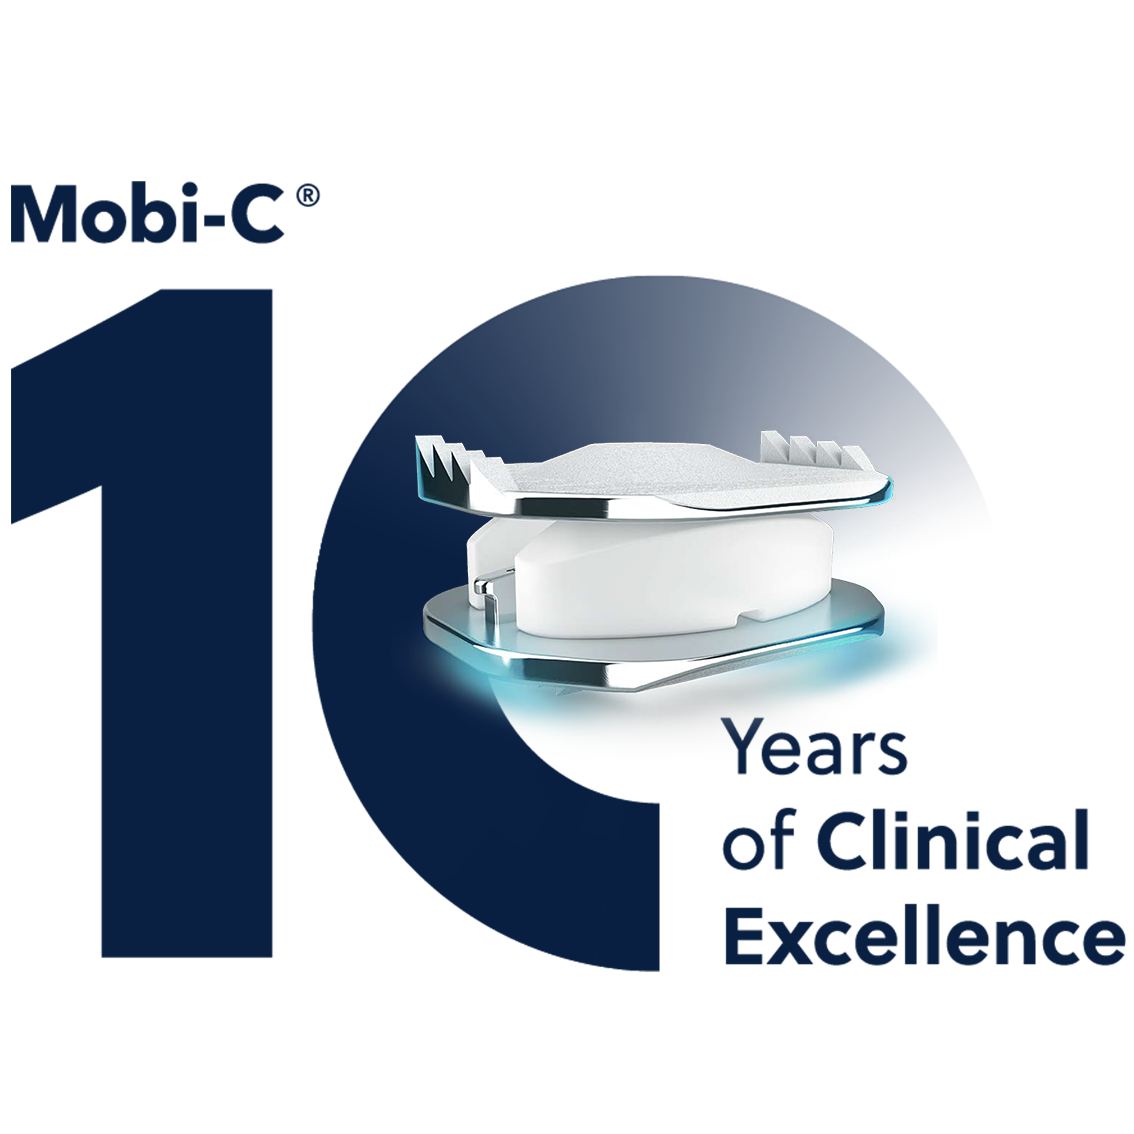 Mobi-C 10 Years of Clinical Excellence